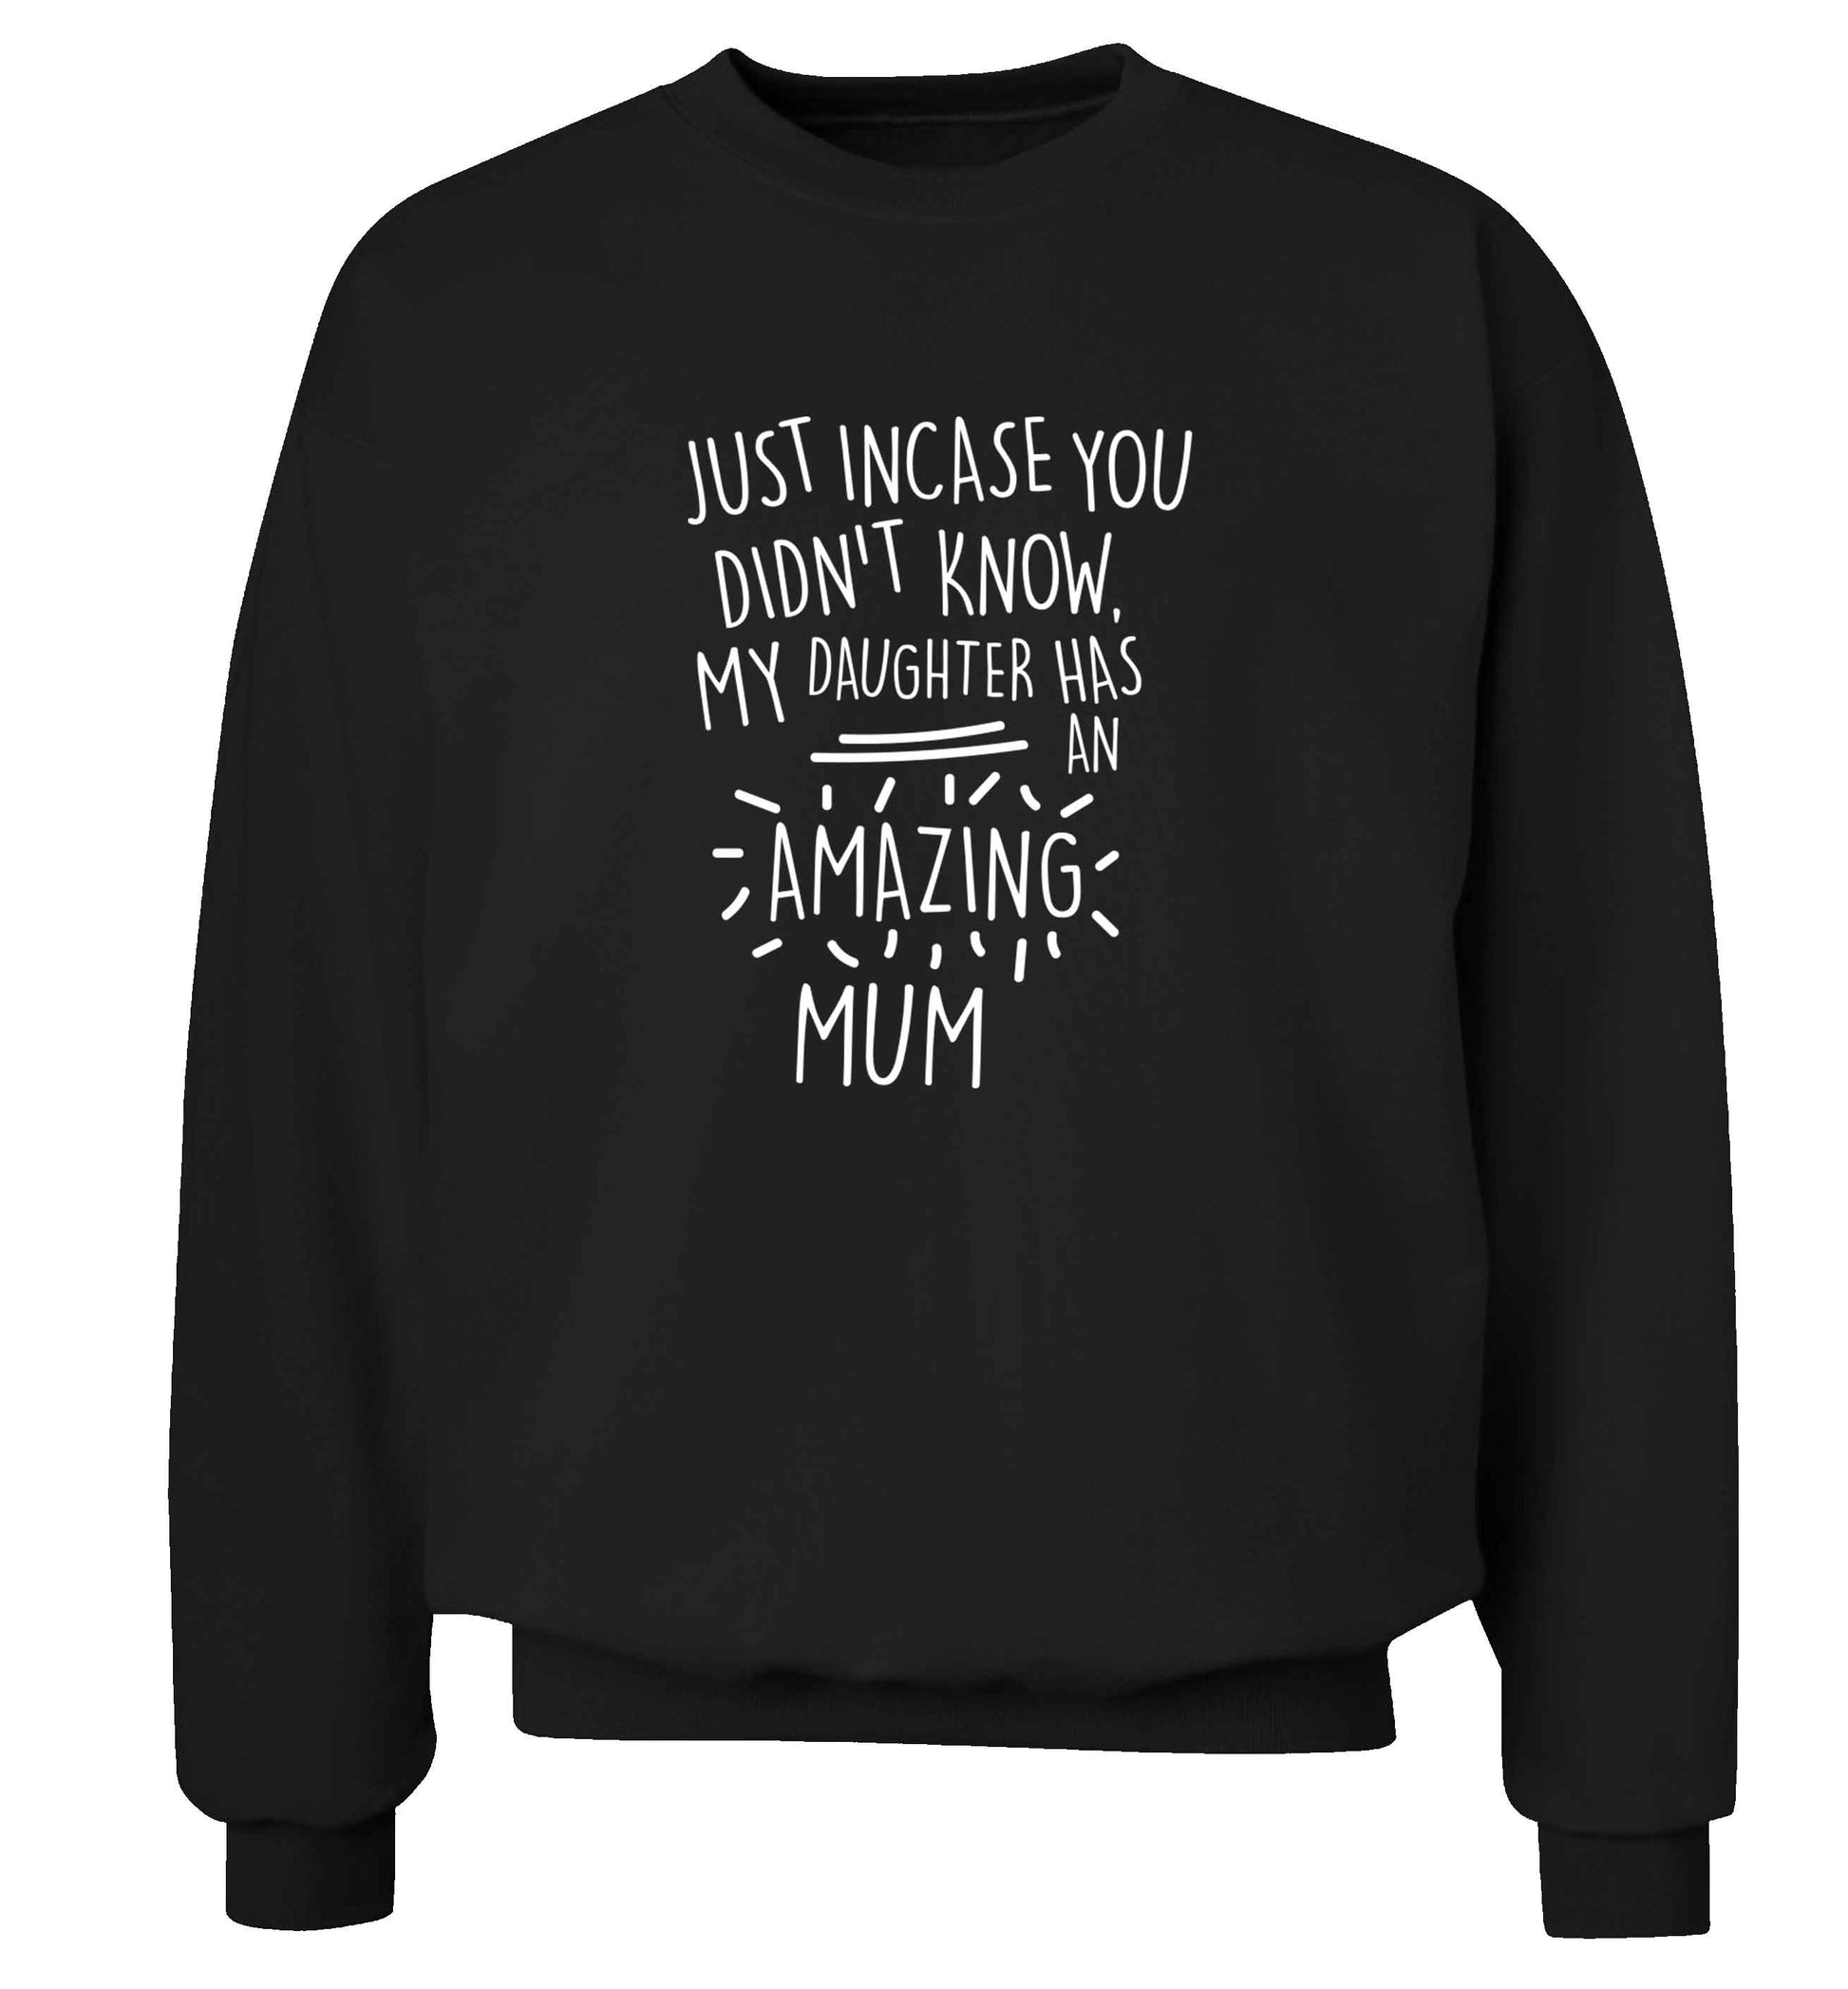 Just incase you didn't know my daughter has an amazing mum adult's unisex black sweater 2XL